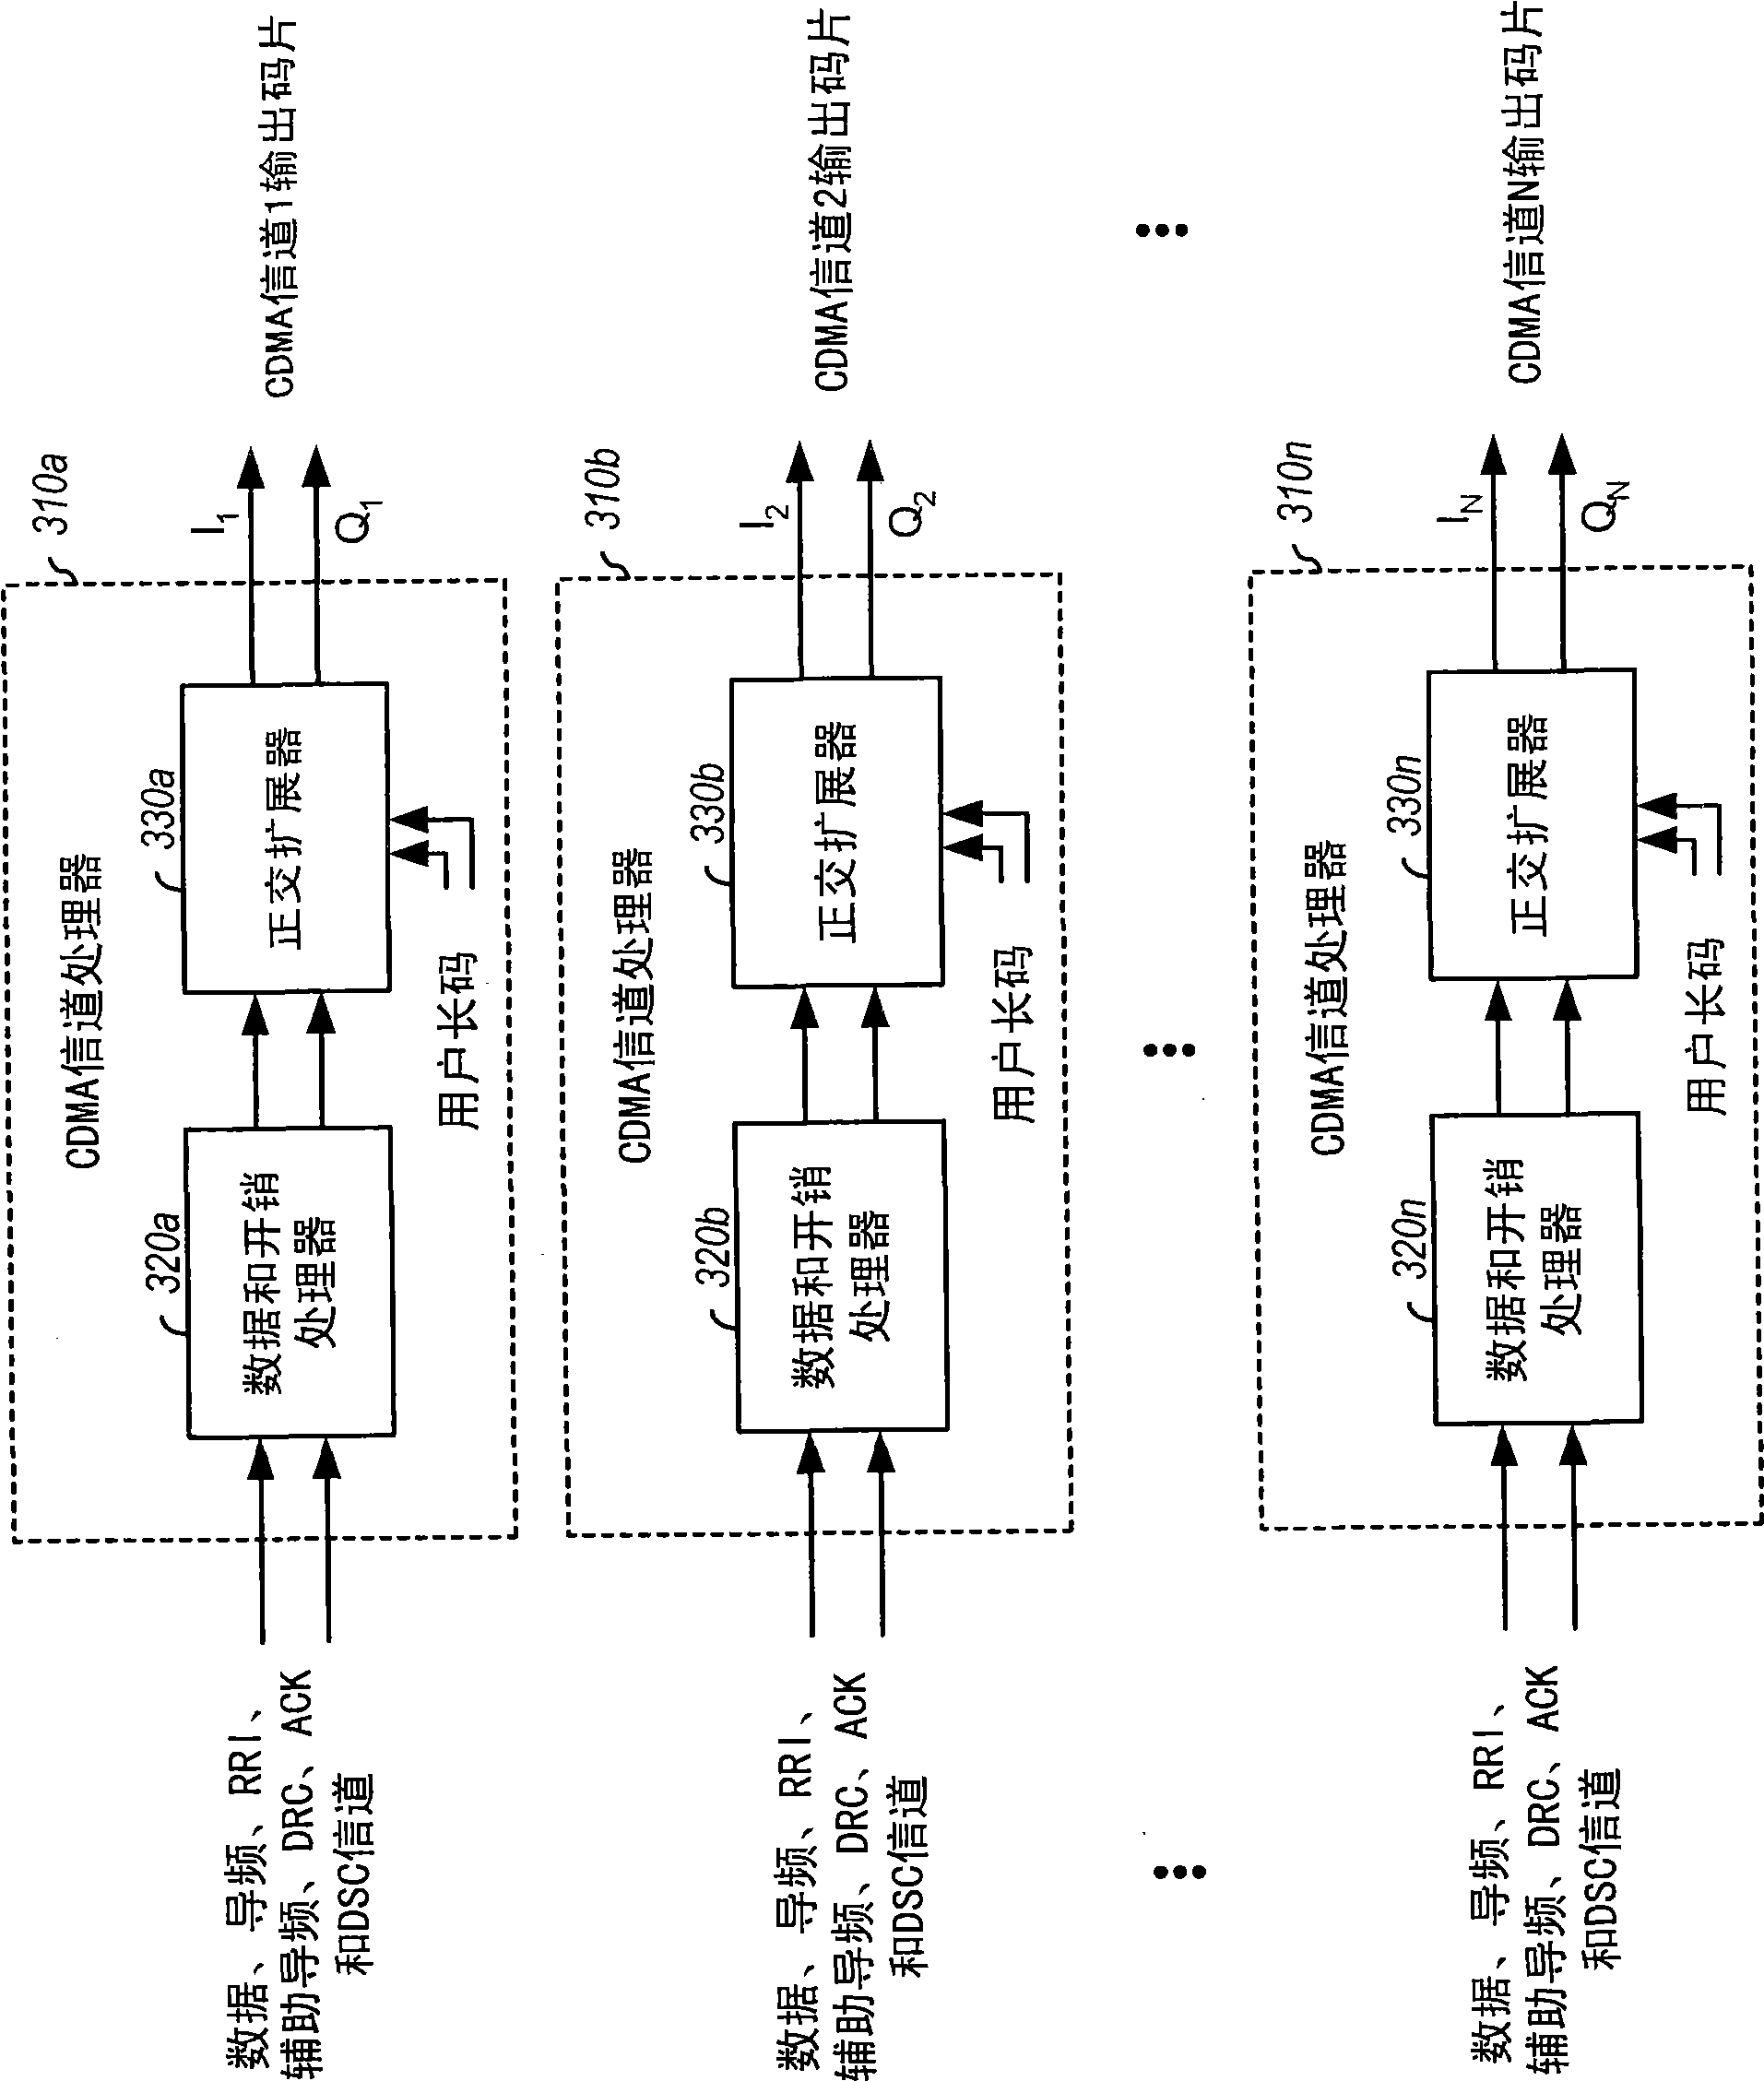 Apparatus for transmitting multiple CDMA channels